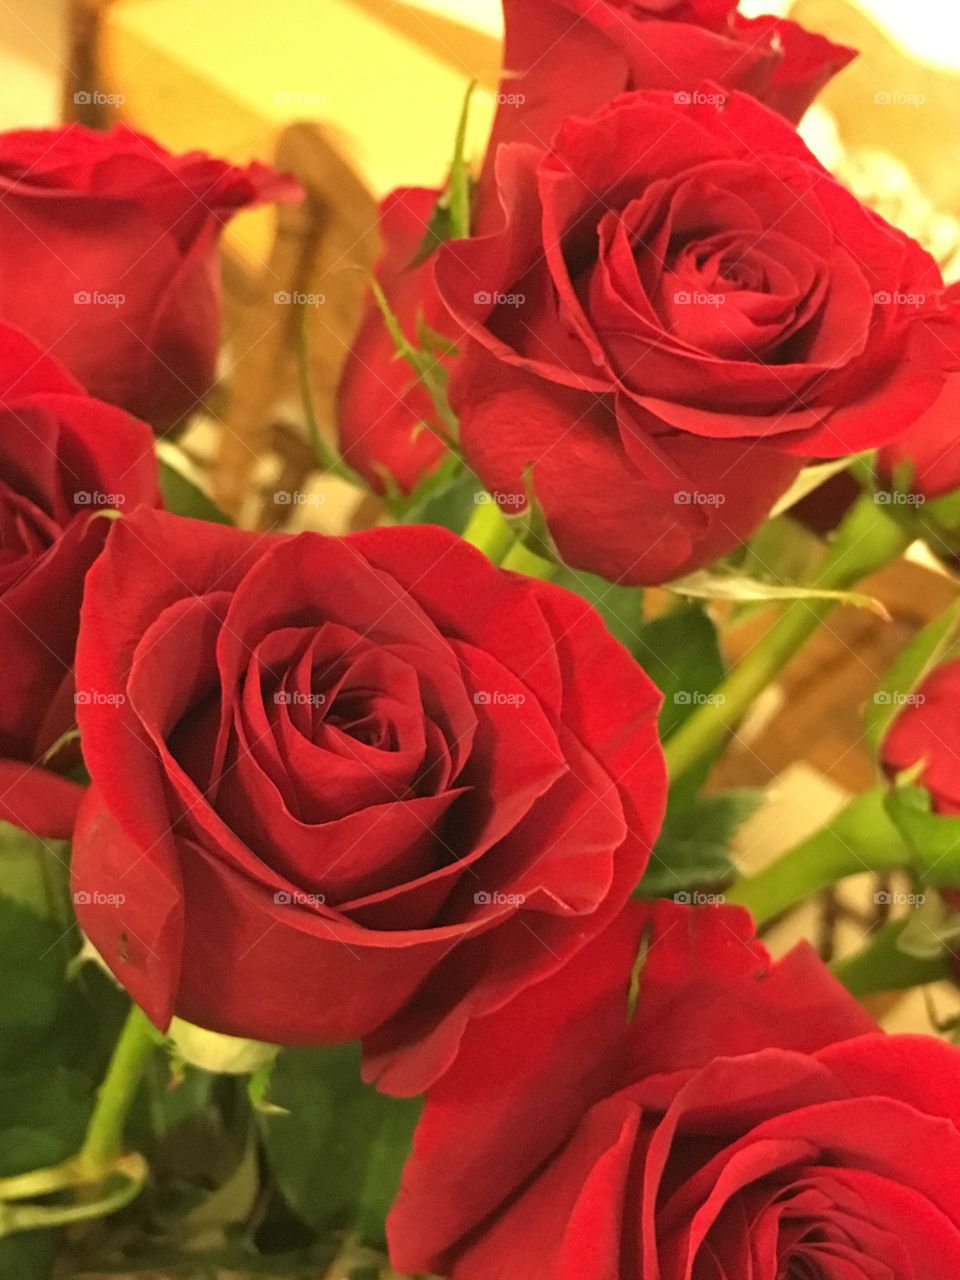 Red roses love!